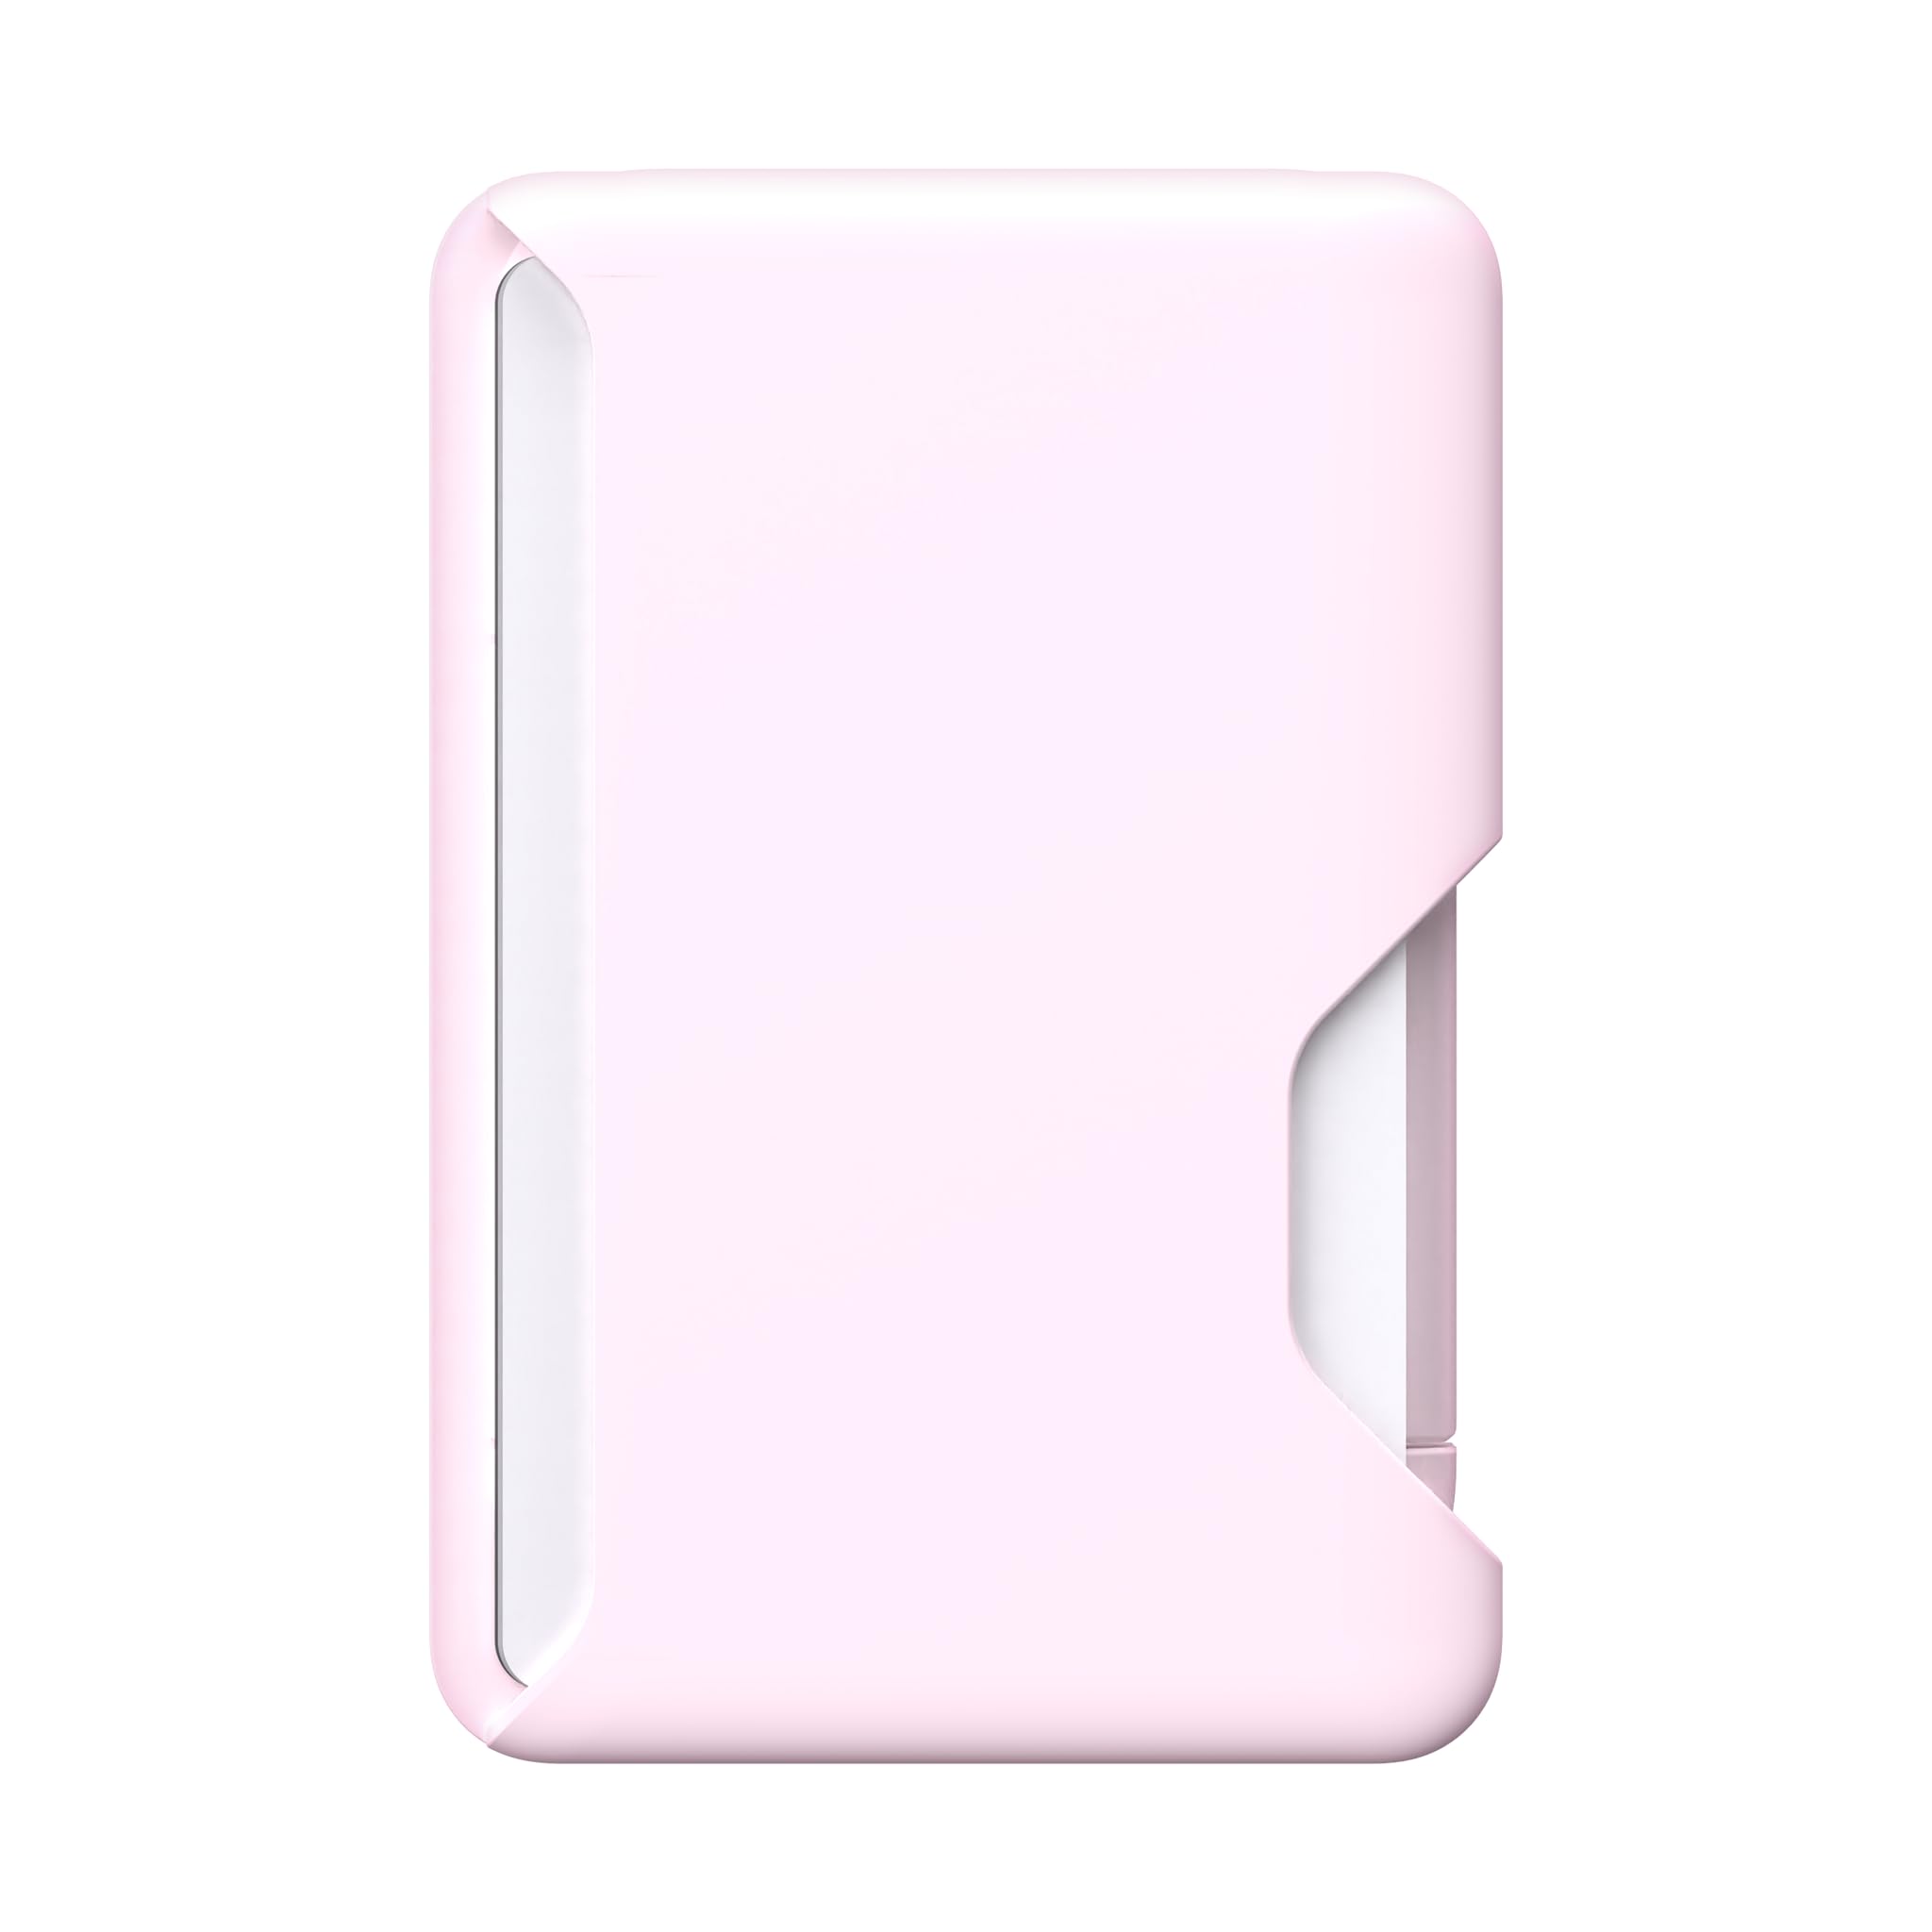 Speck iPhone Wallet MagSafe Accessory - Removable ClickLock No-Slip Interlock - Holds 1-3 Cards - Soft Touch Finish, Scratch Resistant Card Holder Built for MagSafe - Nimbus Pink/Pale Violet